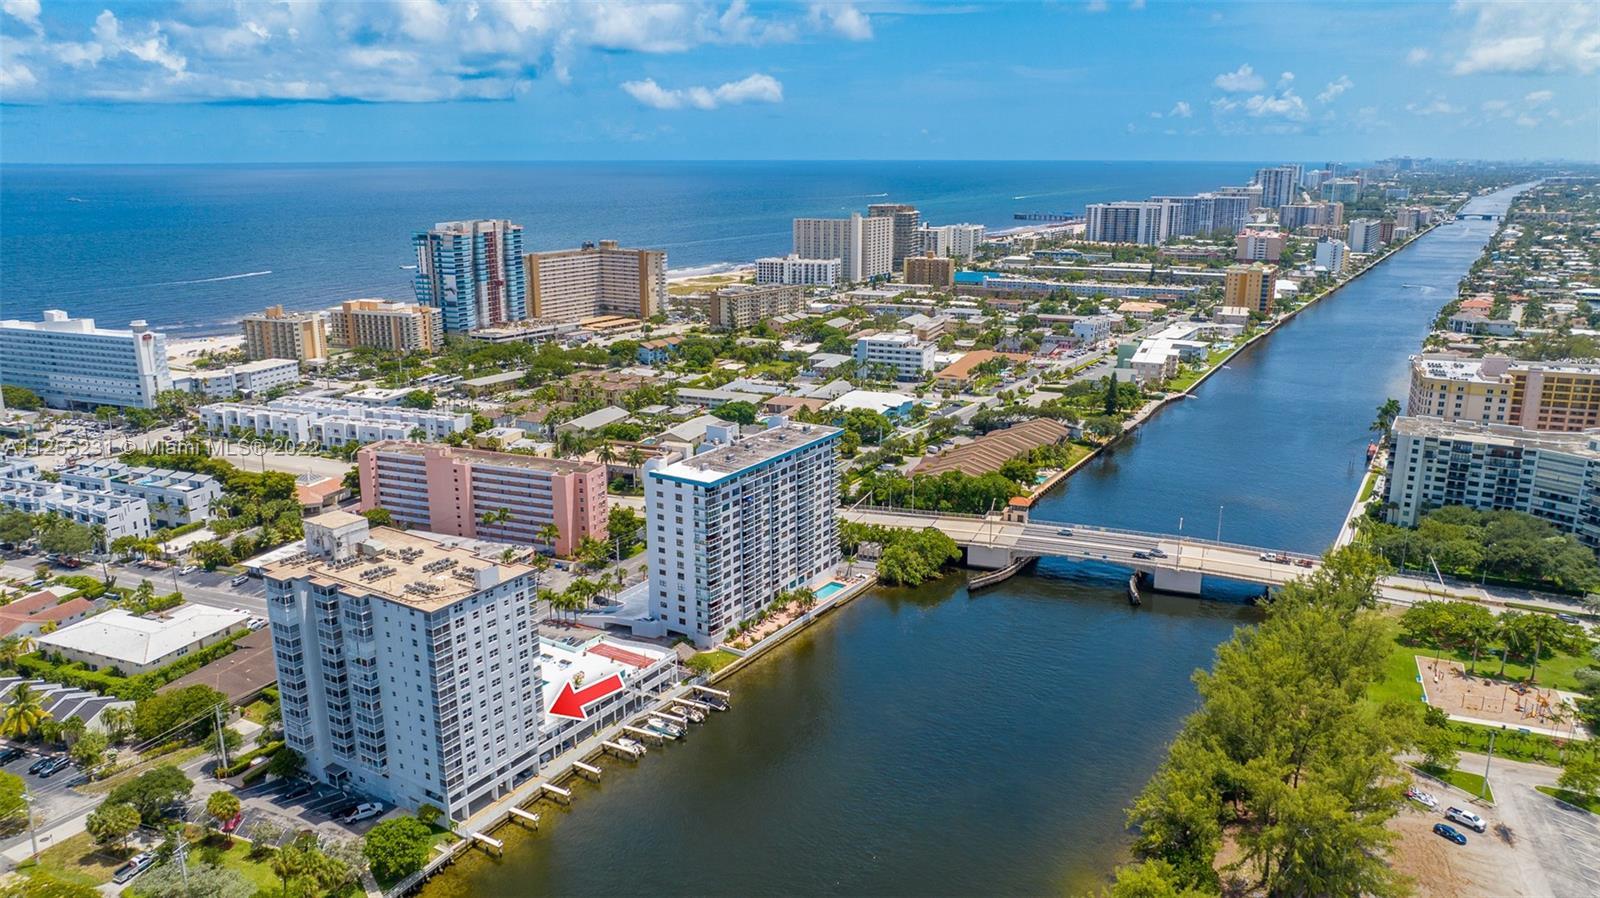 AMAZING 2 beds / 2 baths condo located in the Intracoastal Tower overlooking the water.
CORNER unit